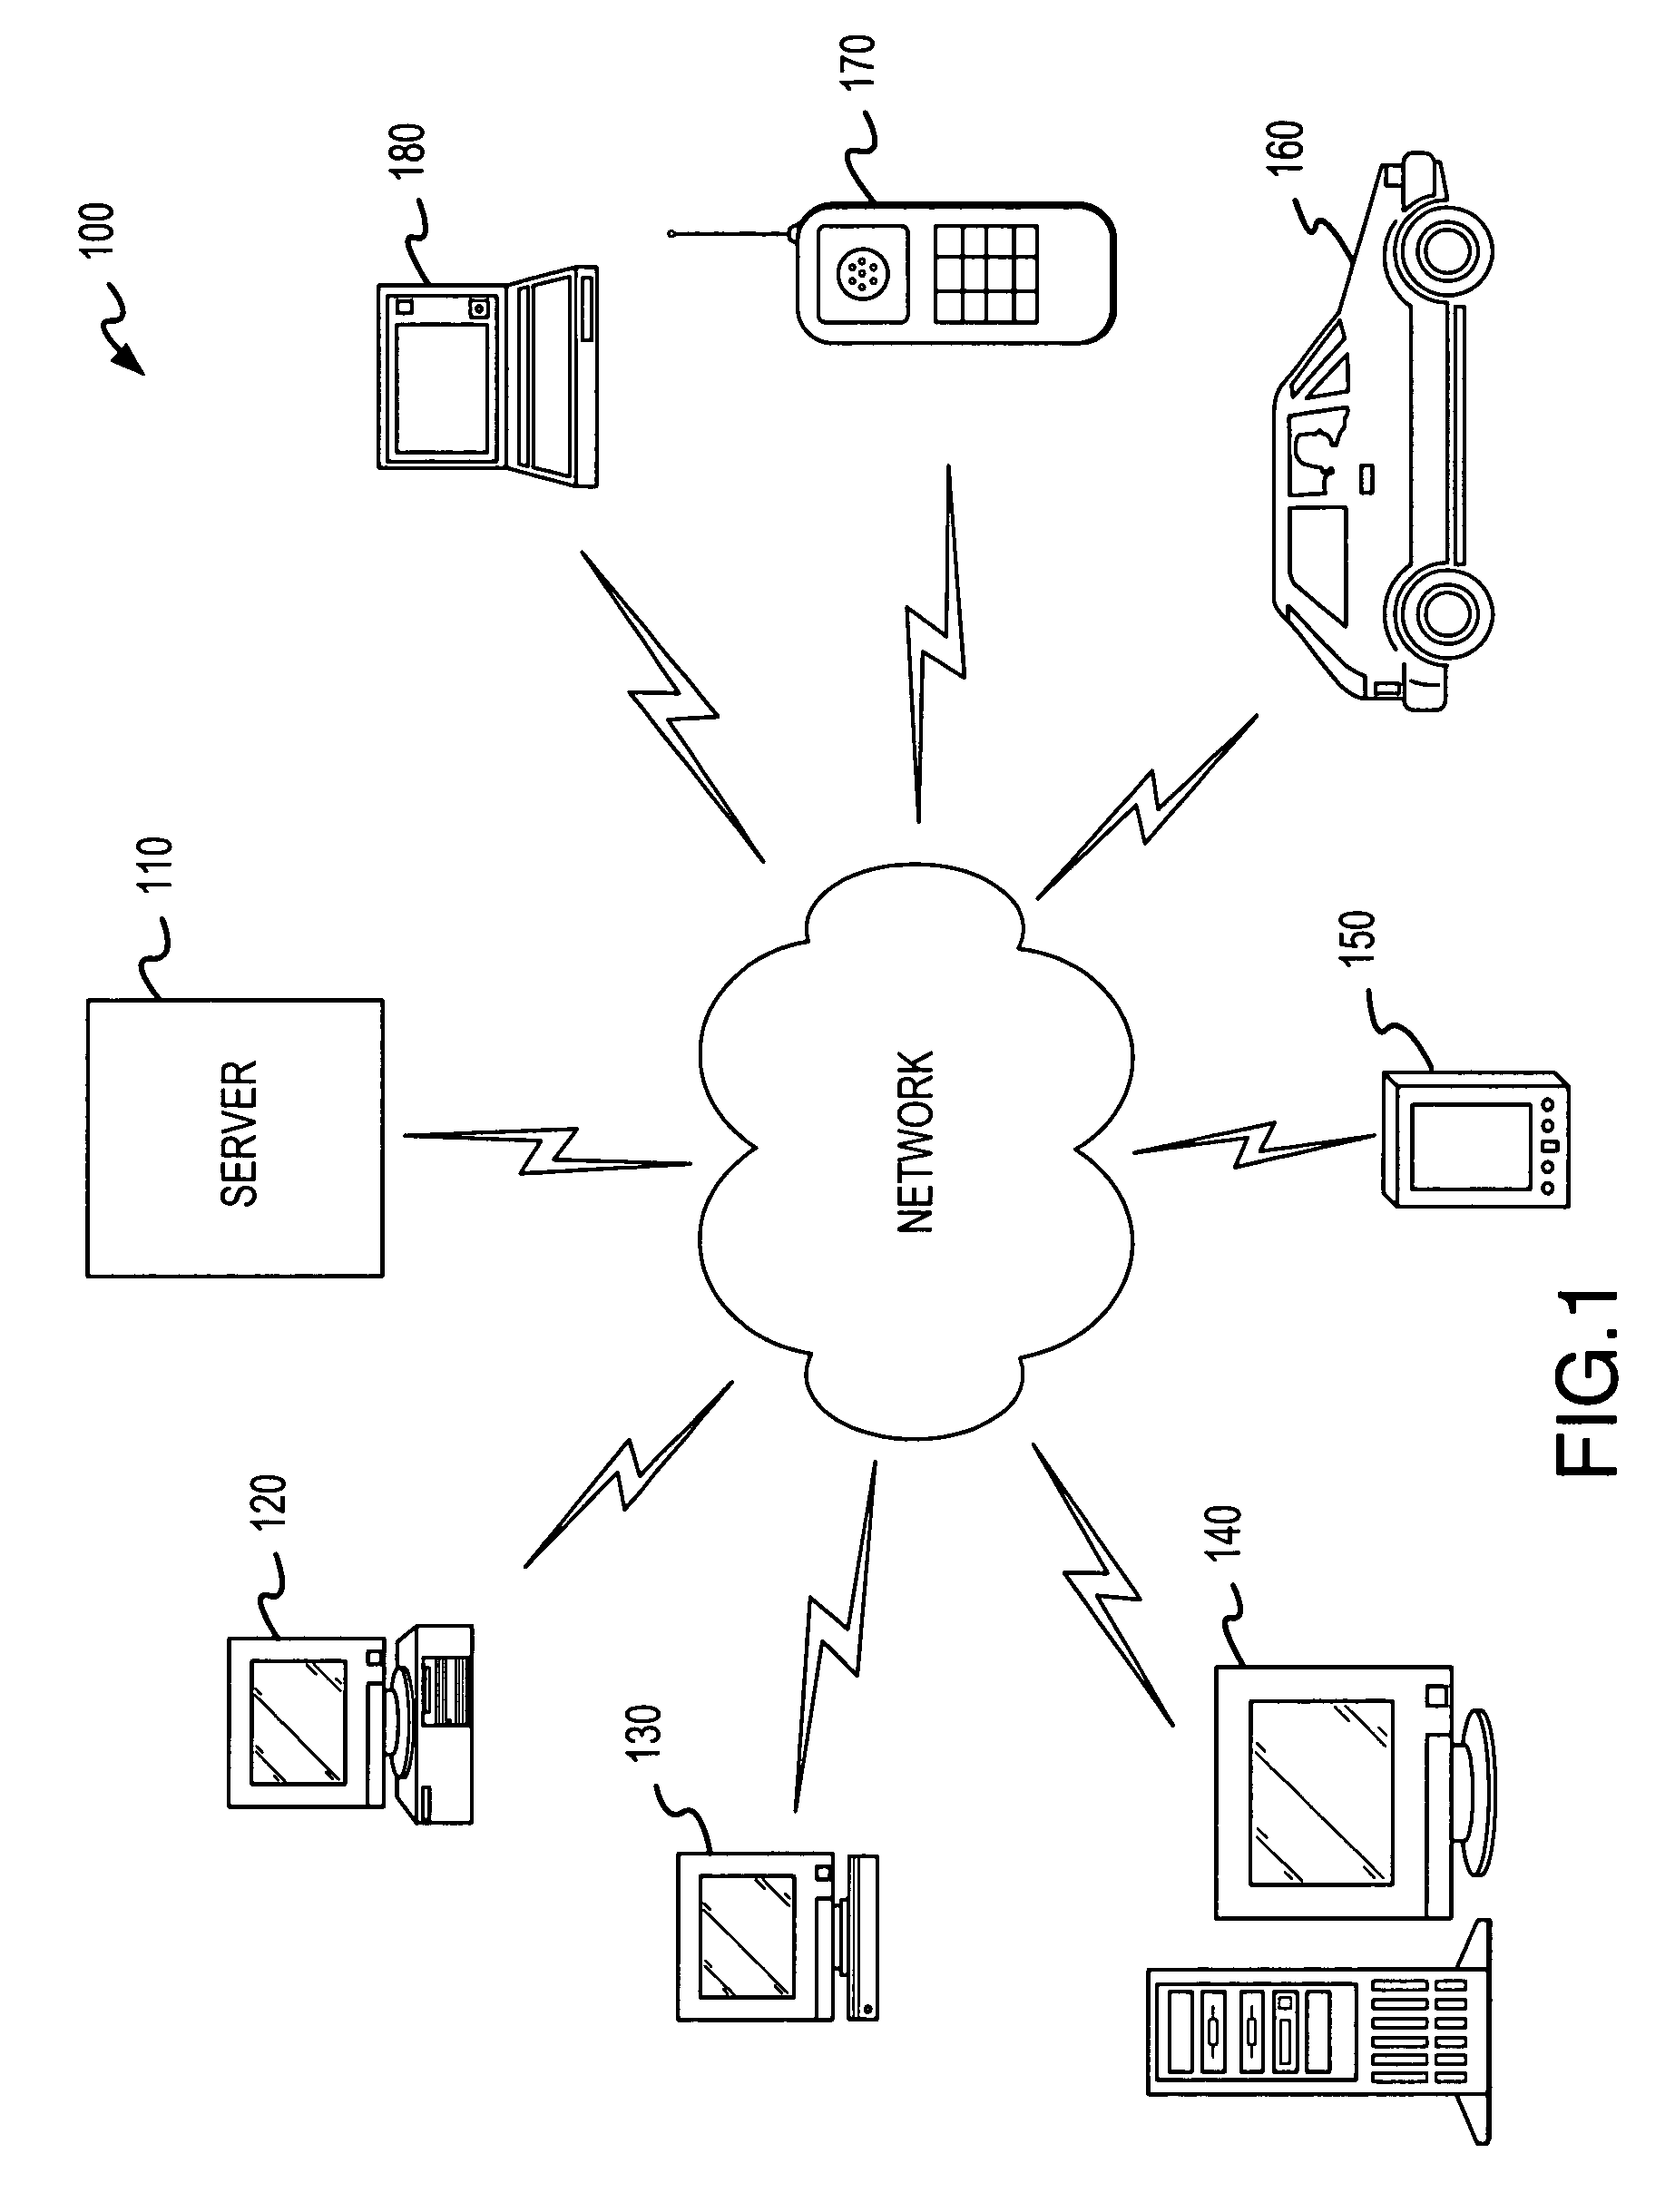 Screening and survey selection system and method of operating the same